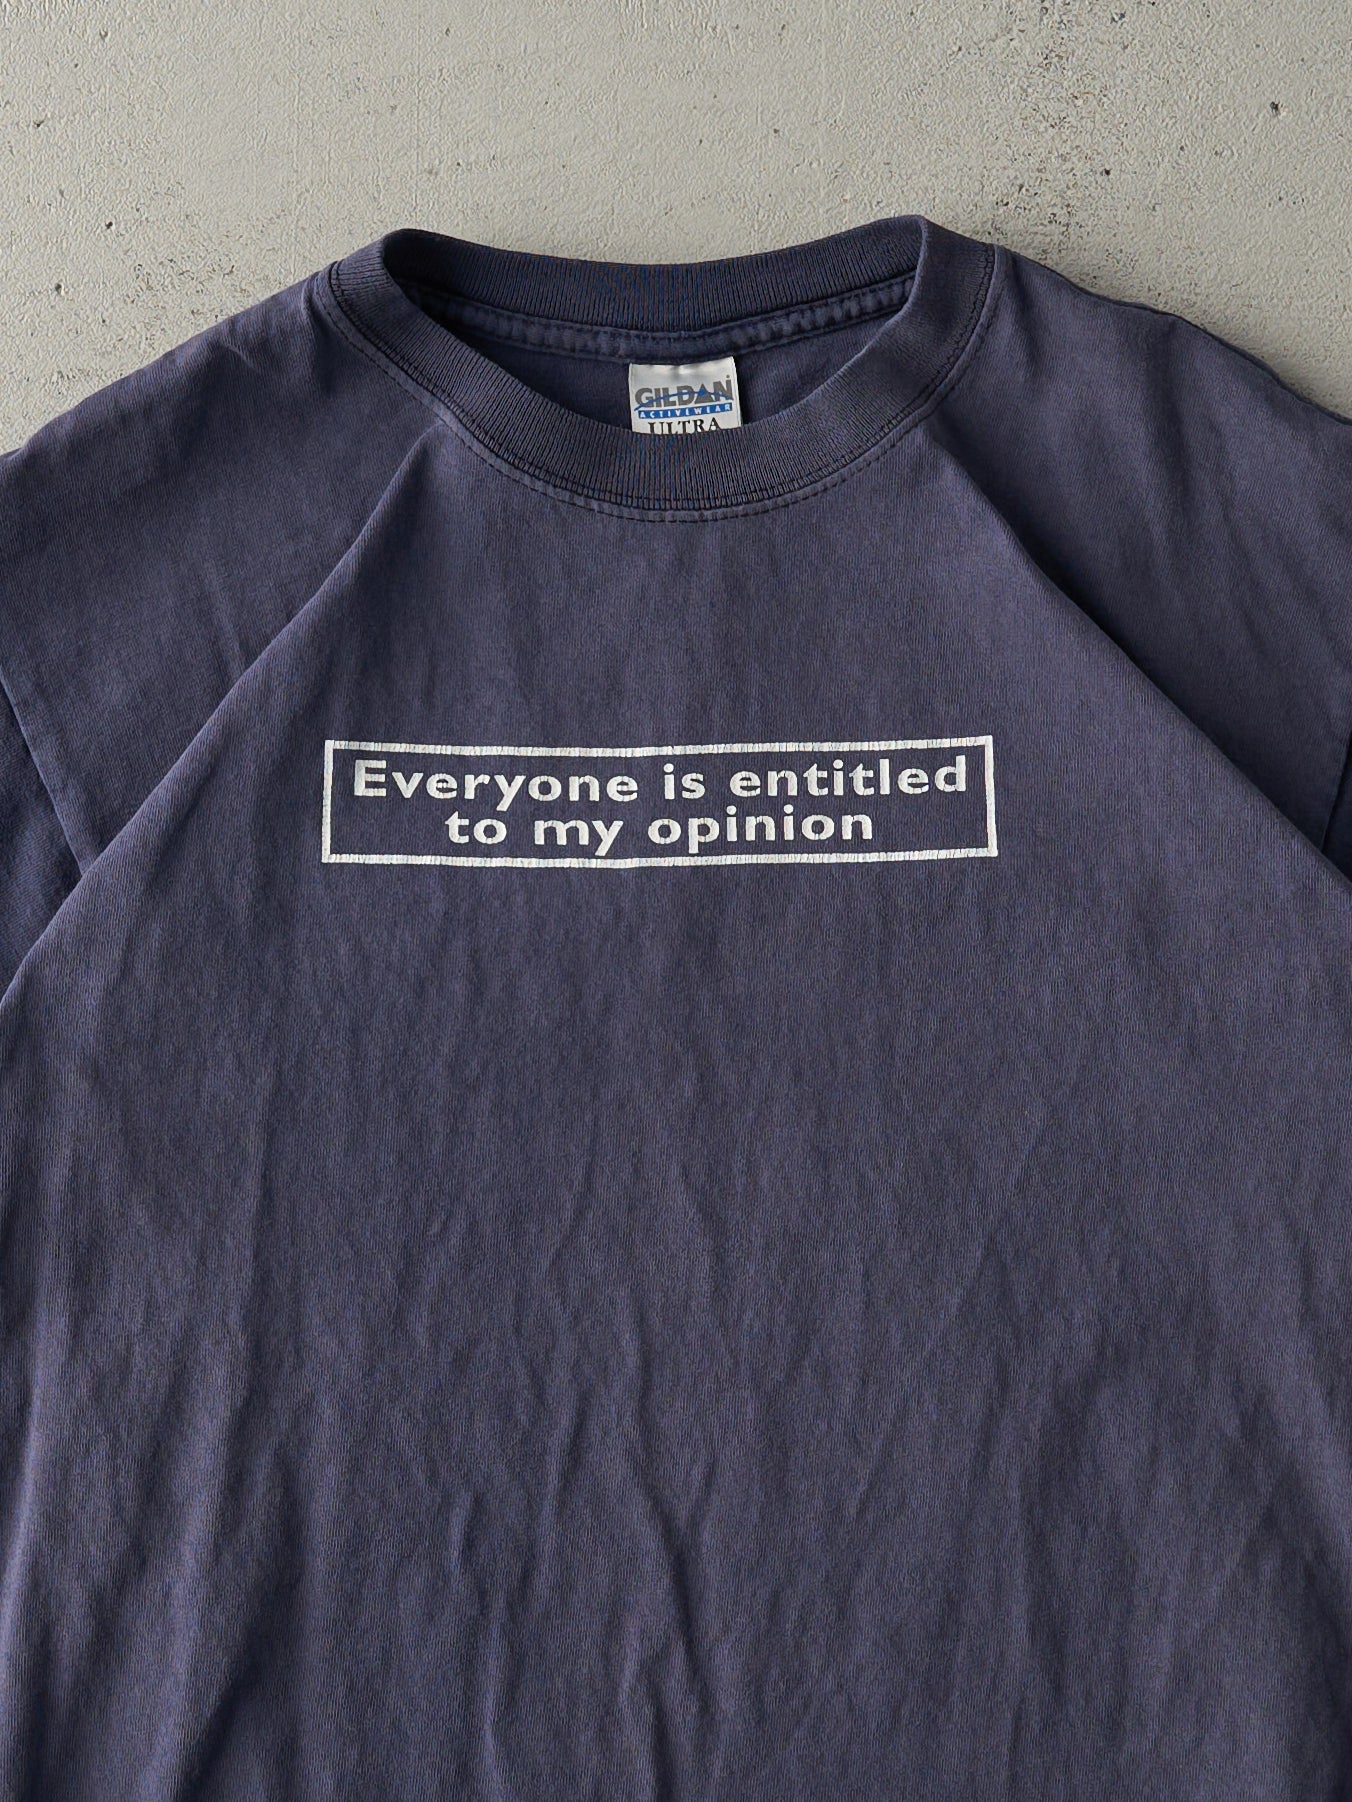 Vintage Y2K Navy Blue "Everyone Is Entitled To My Opinion" Tee (M)